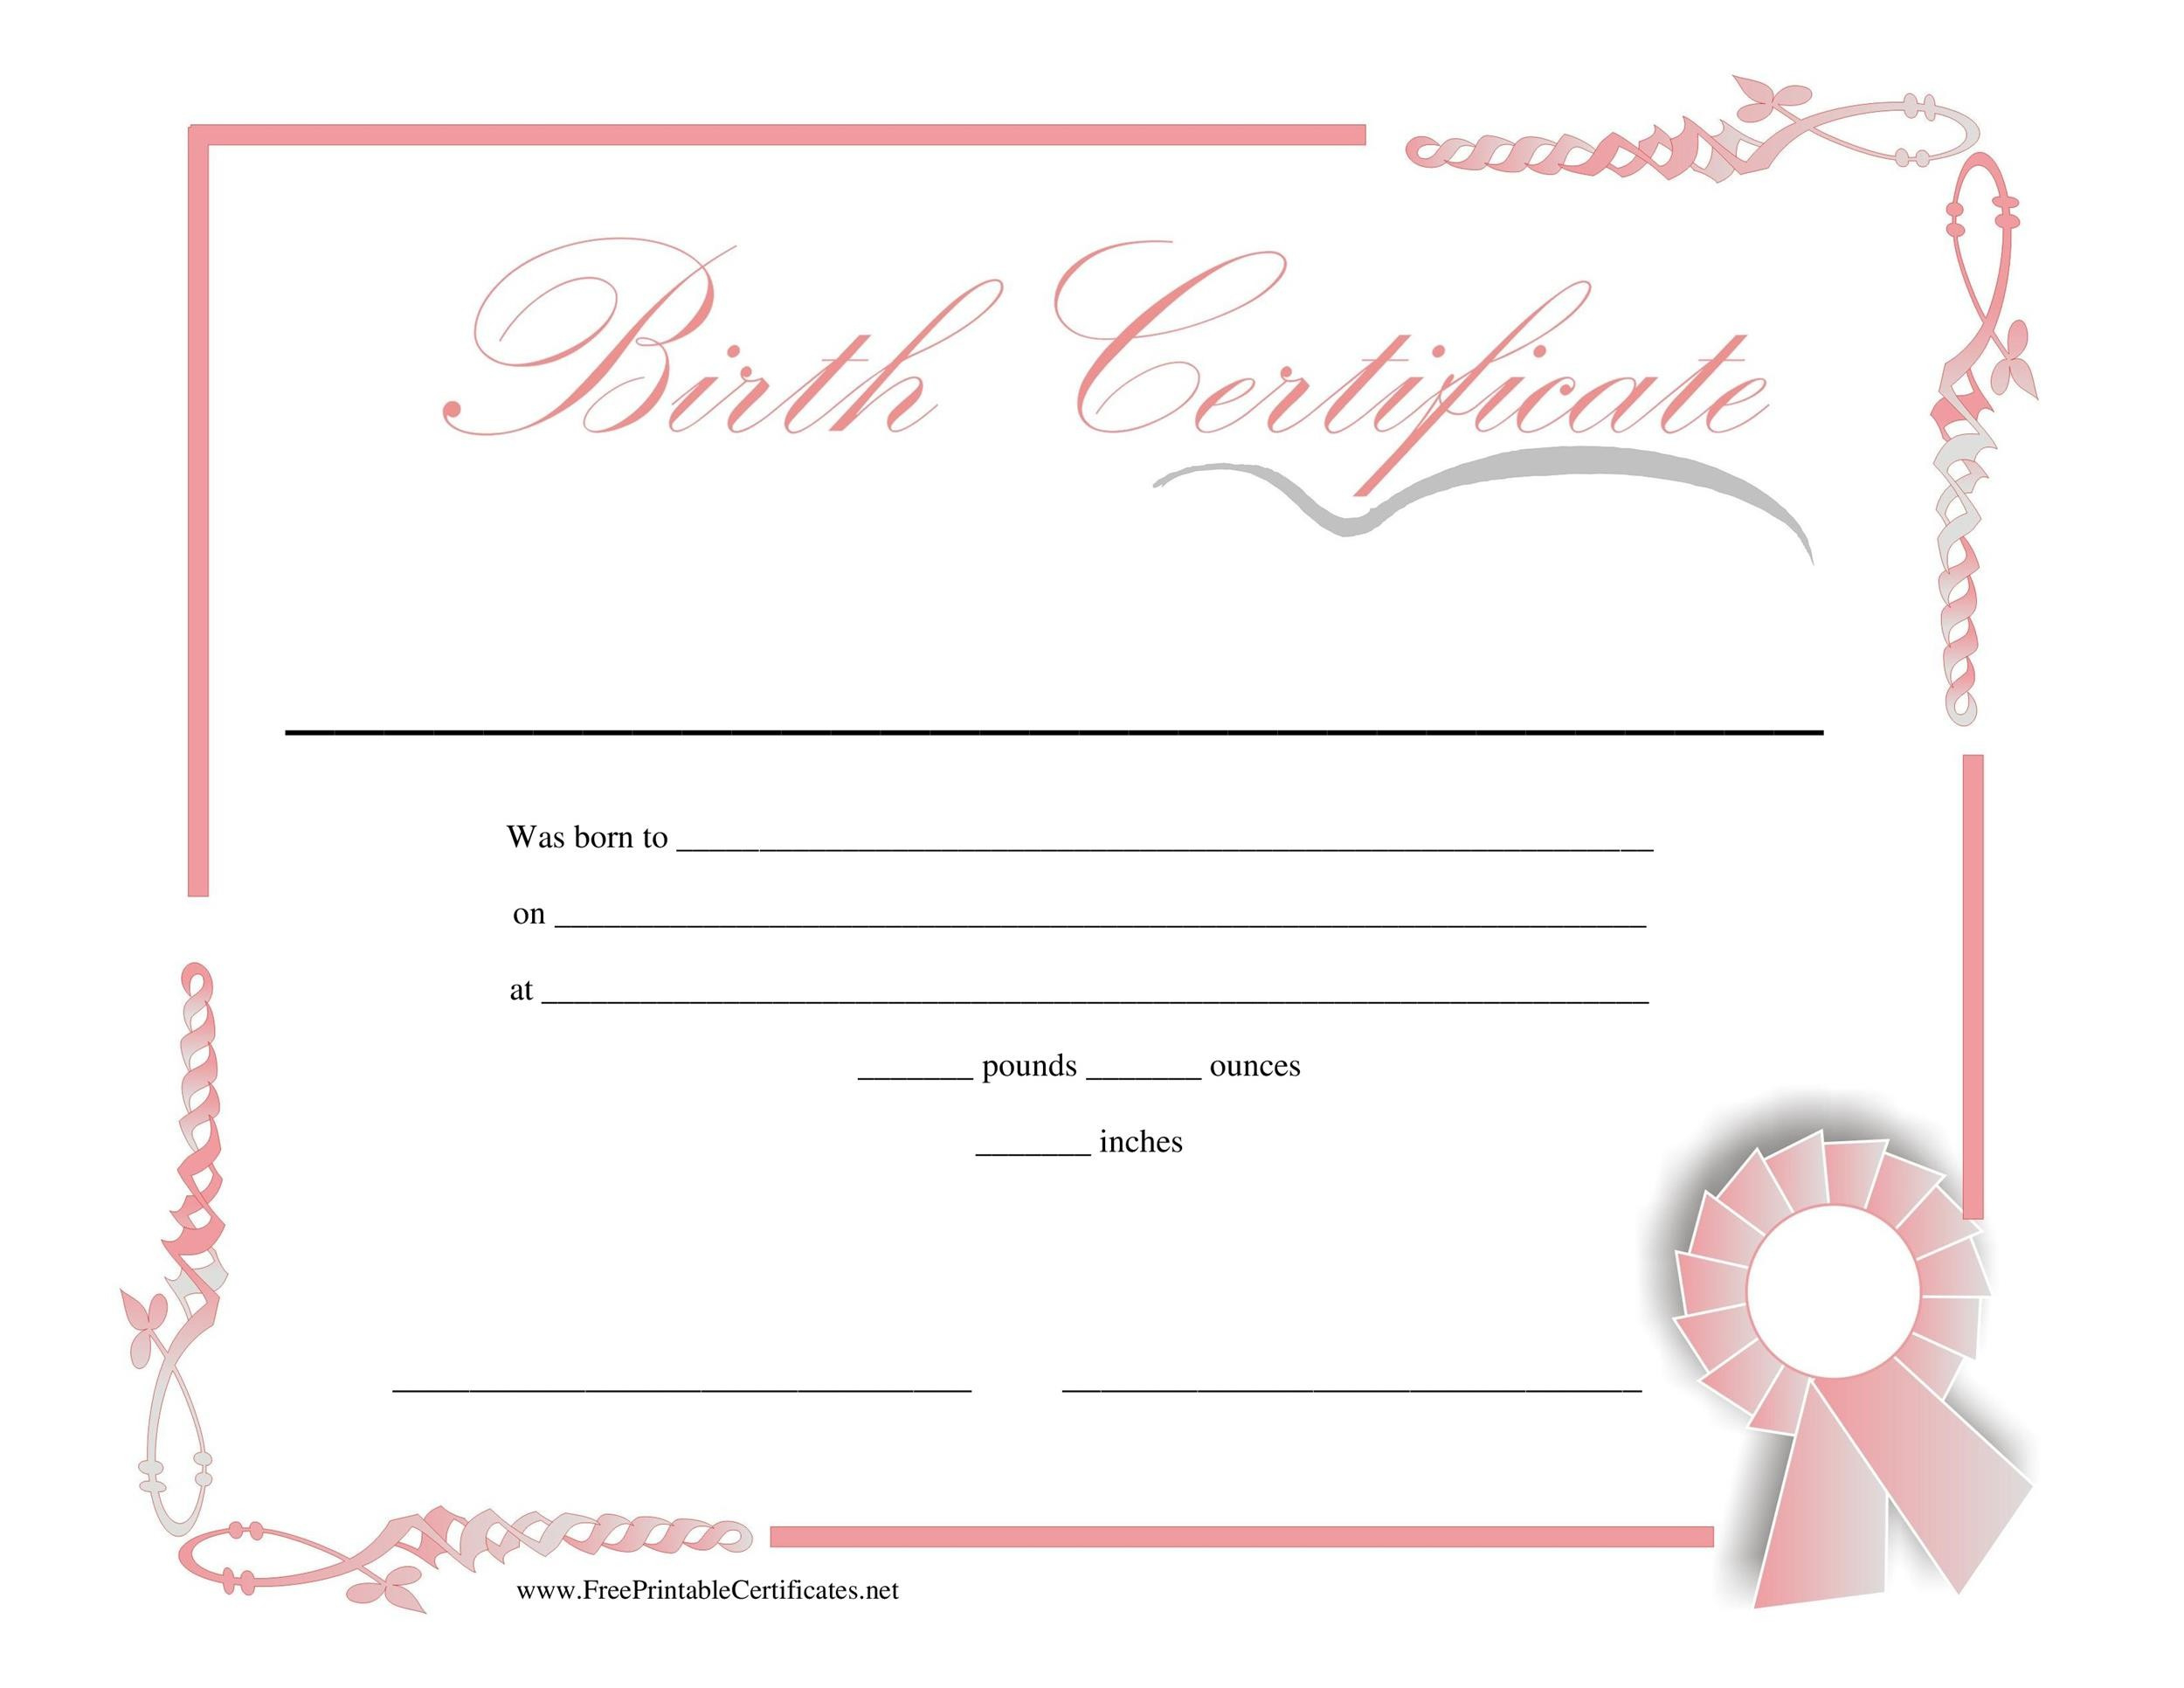 15 Birth Certificate Templates Word  Pdf  Template Lab with regard to Amazing Birth Certificate Template For Microsoft Word